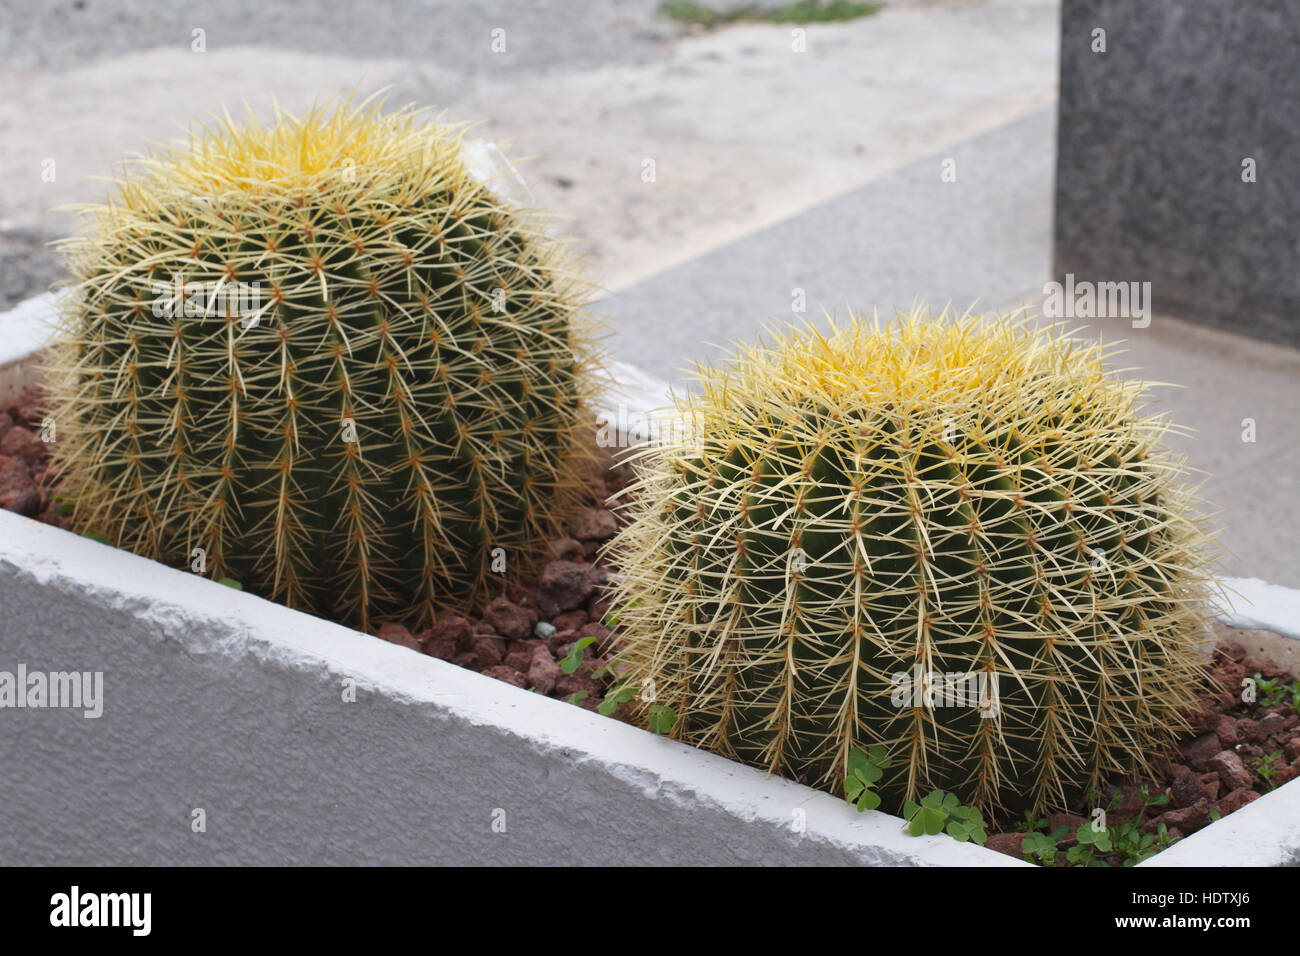 Golden Barrel Cactus in the flower bed outside. horizontal Stock Photo